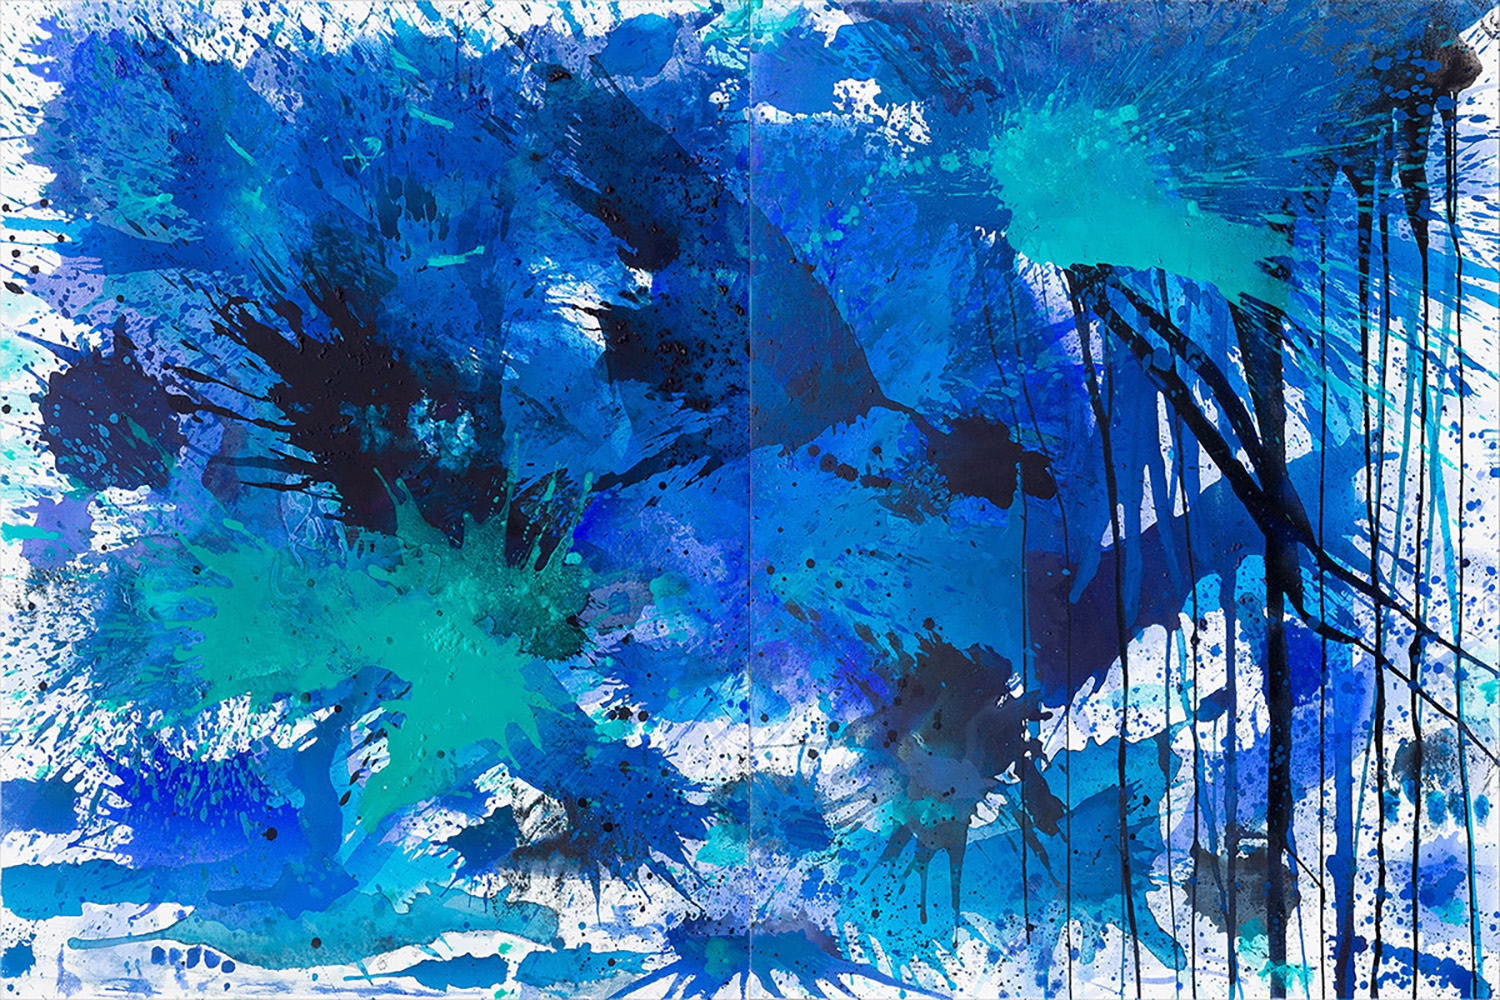 J. Steven Manolis, BlueLand Splash, 2015, Acrylic painting on canvas, 48 x 72 inches, Extra large Wall Art, Blue Abstract Art for sale at Manolis Projects Art Gallery, Miami, Fl